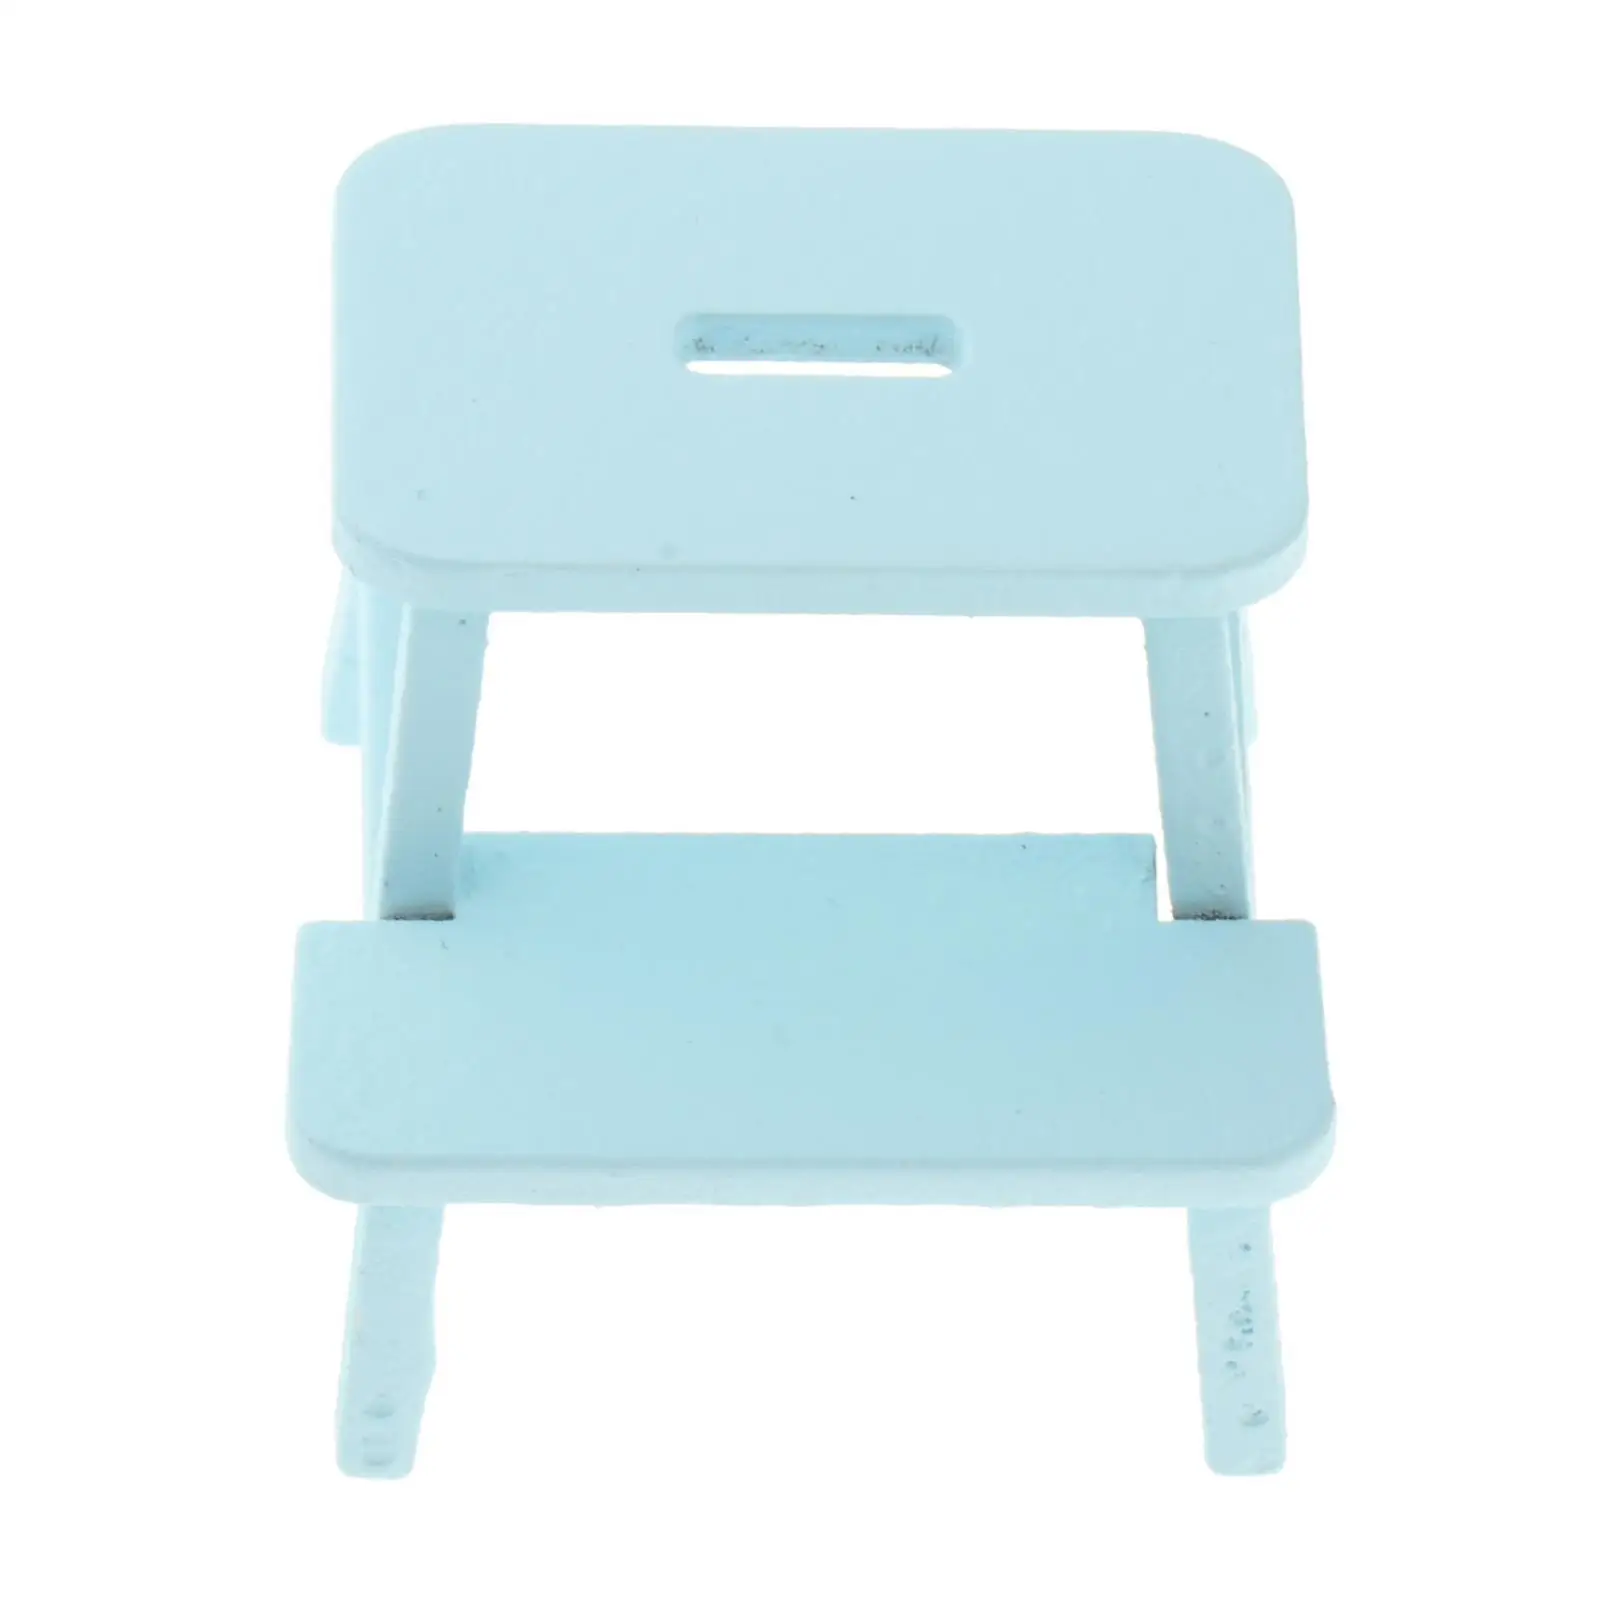 1:12 Scale Dollhouse Step Chair Handpainted Accessory DIY Decoration Two Step Stool Miniature for Doll House Bedroom Kitchen